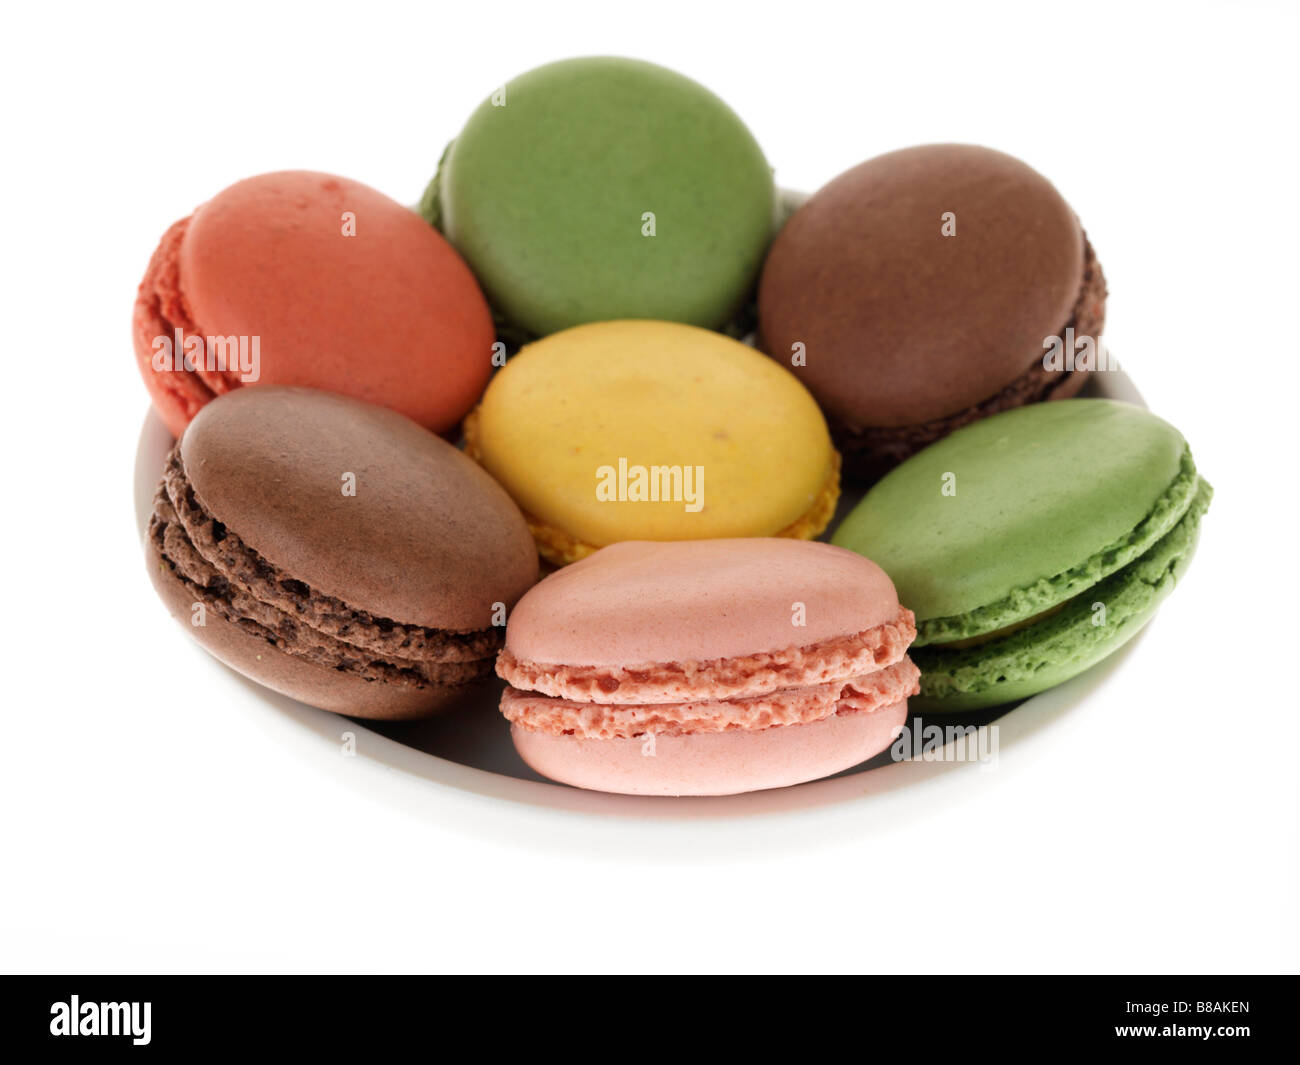 Expensive Biscuits High Resolution Stock Photography and Images - Alamy